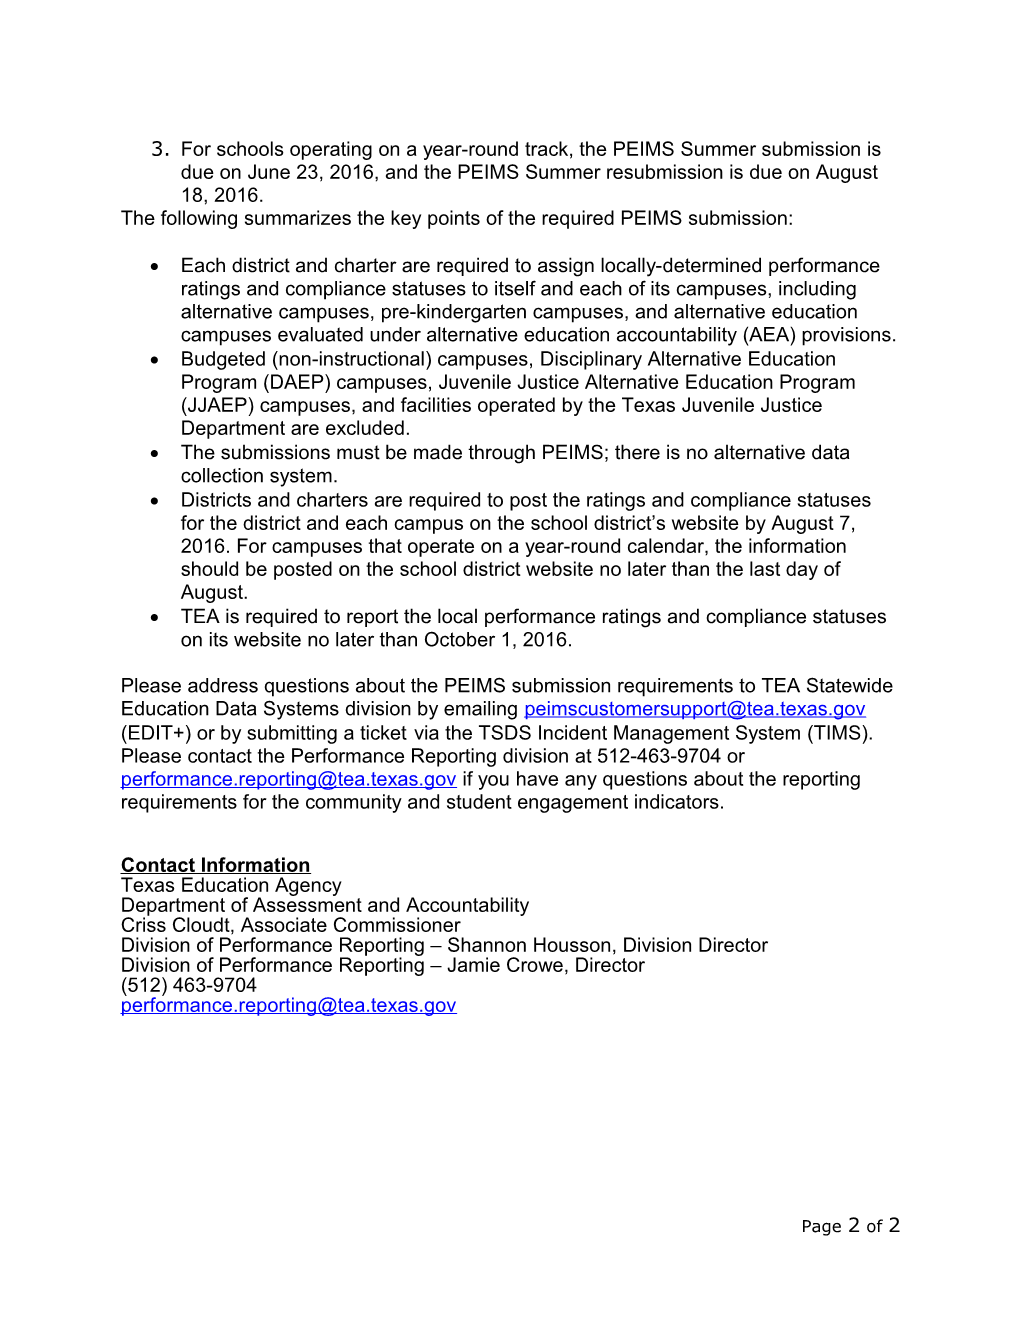 Subject: 2015 16 Reporting Requirements for Community and Student Engagement